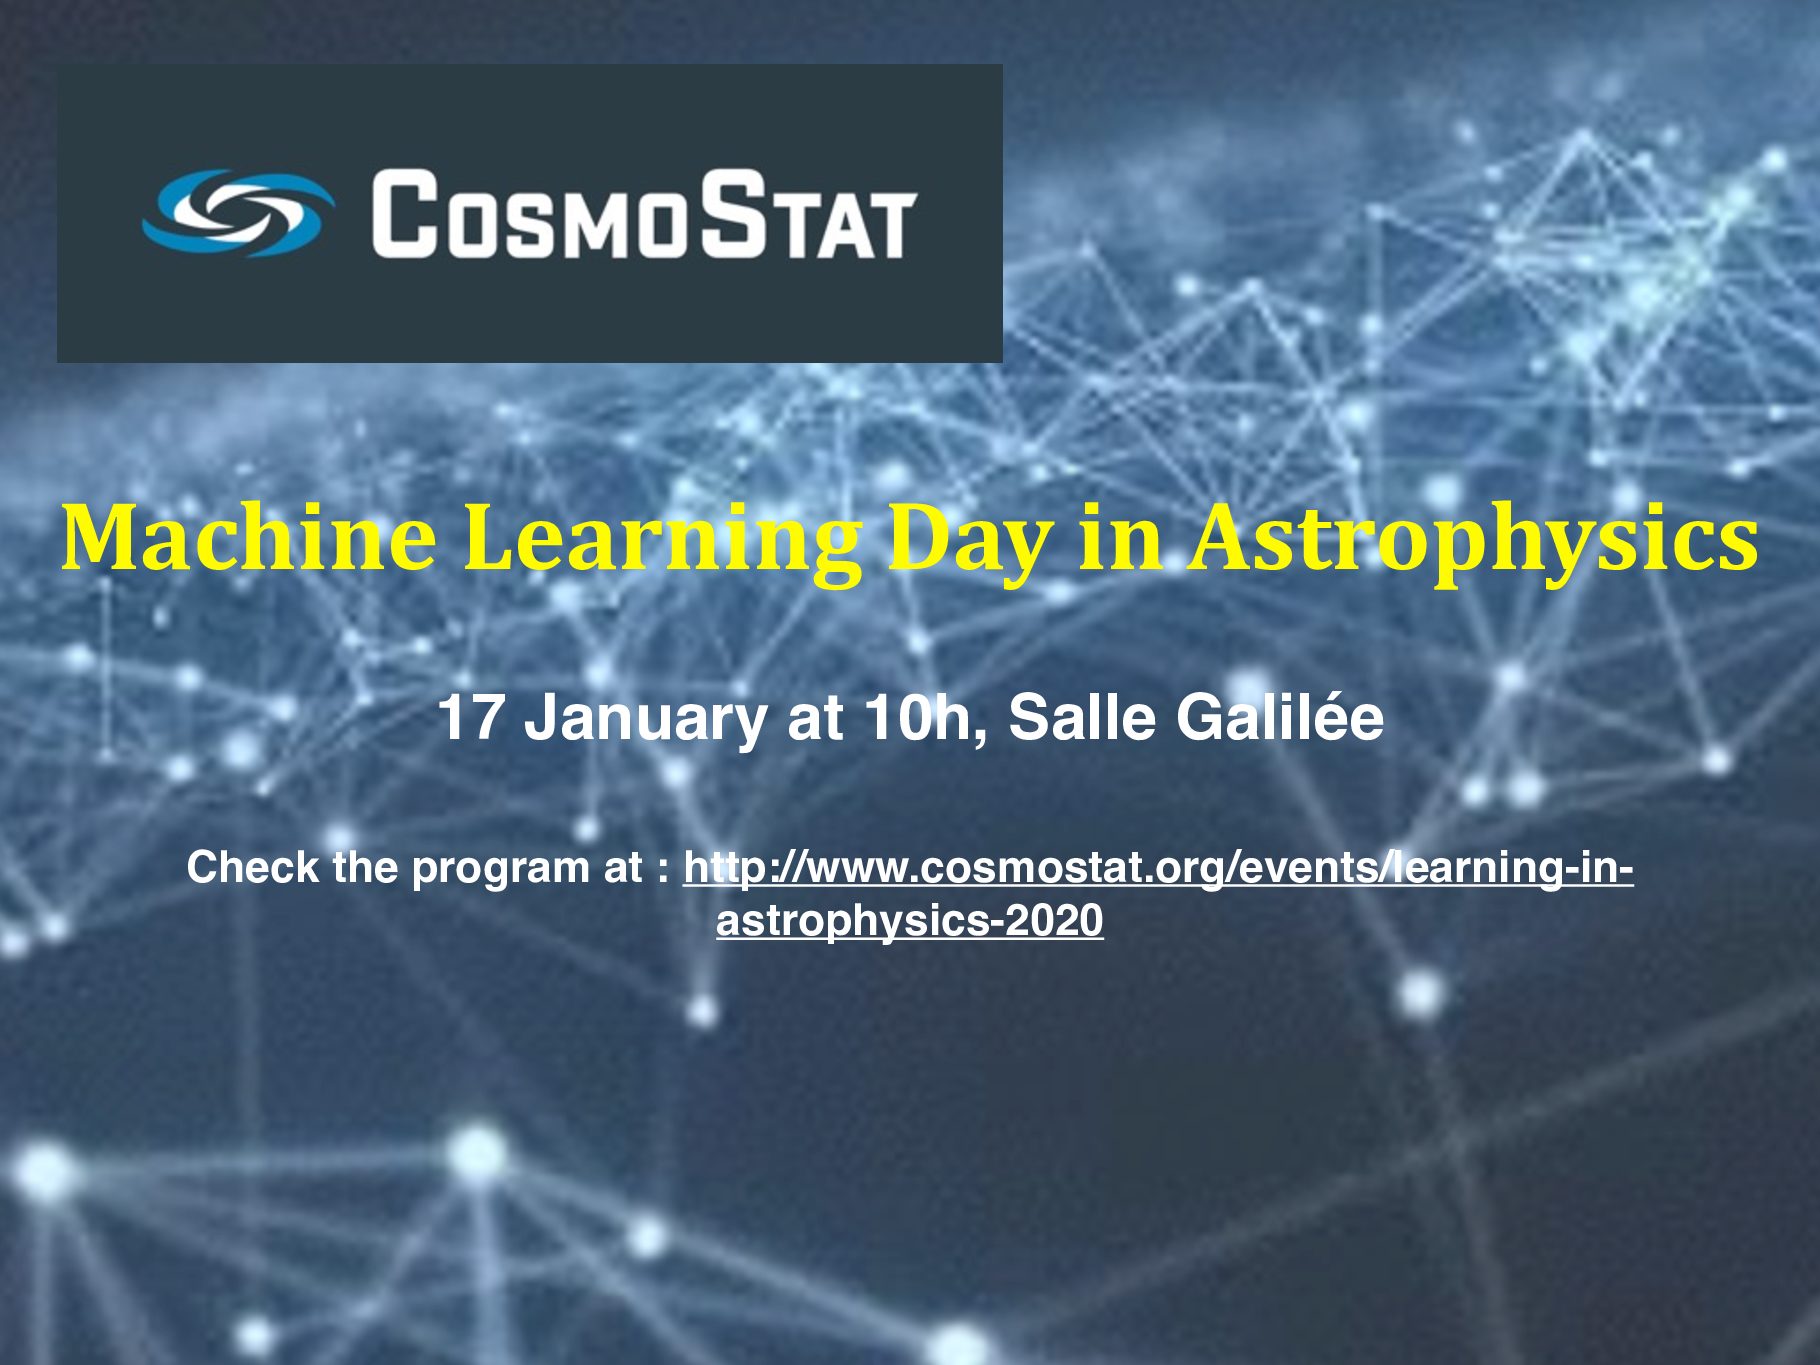 Cosmostat Day on Machine Learning in Astrophysics